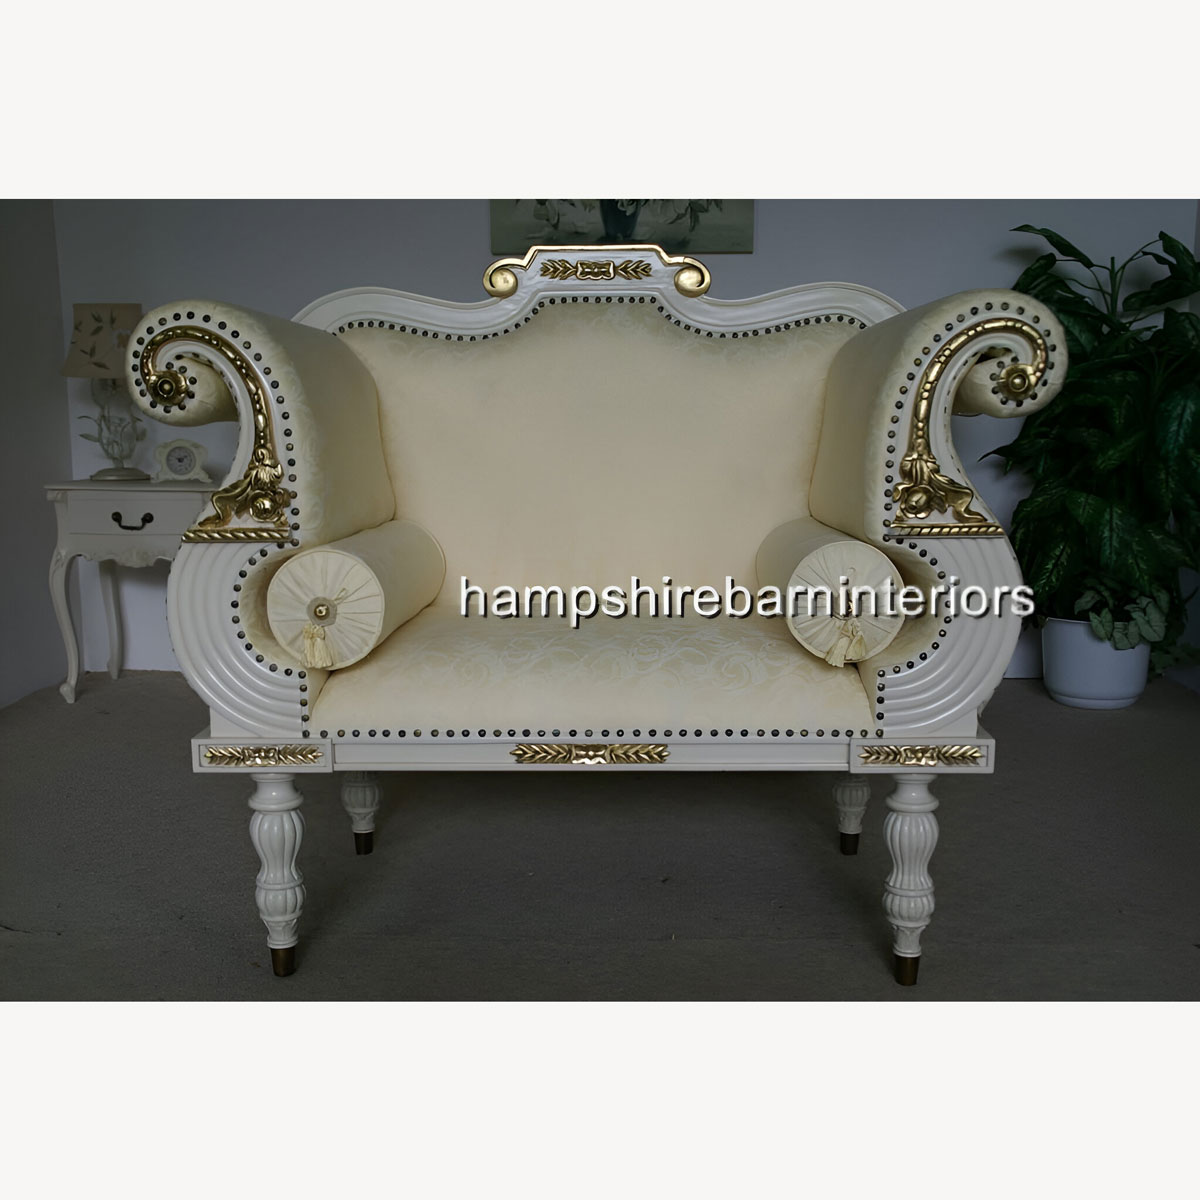 Regency Bergere Suite In Antique White With Cream Fabric 1 - Hampshire Barn Interiors - Regency Bergere Suite In Antique White With Cream Fabric -